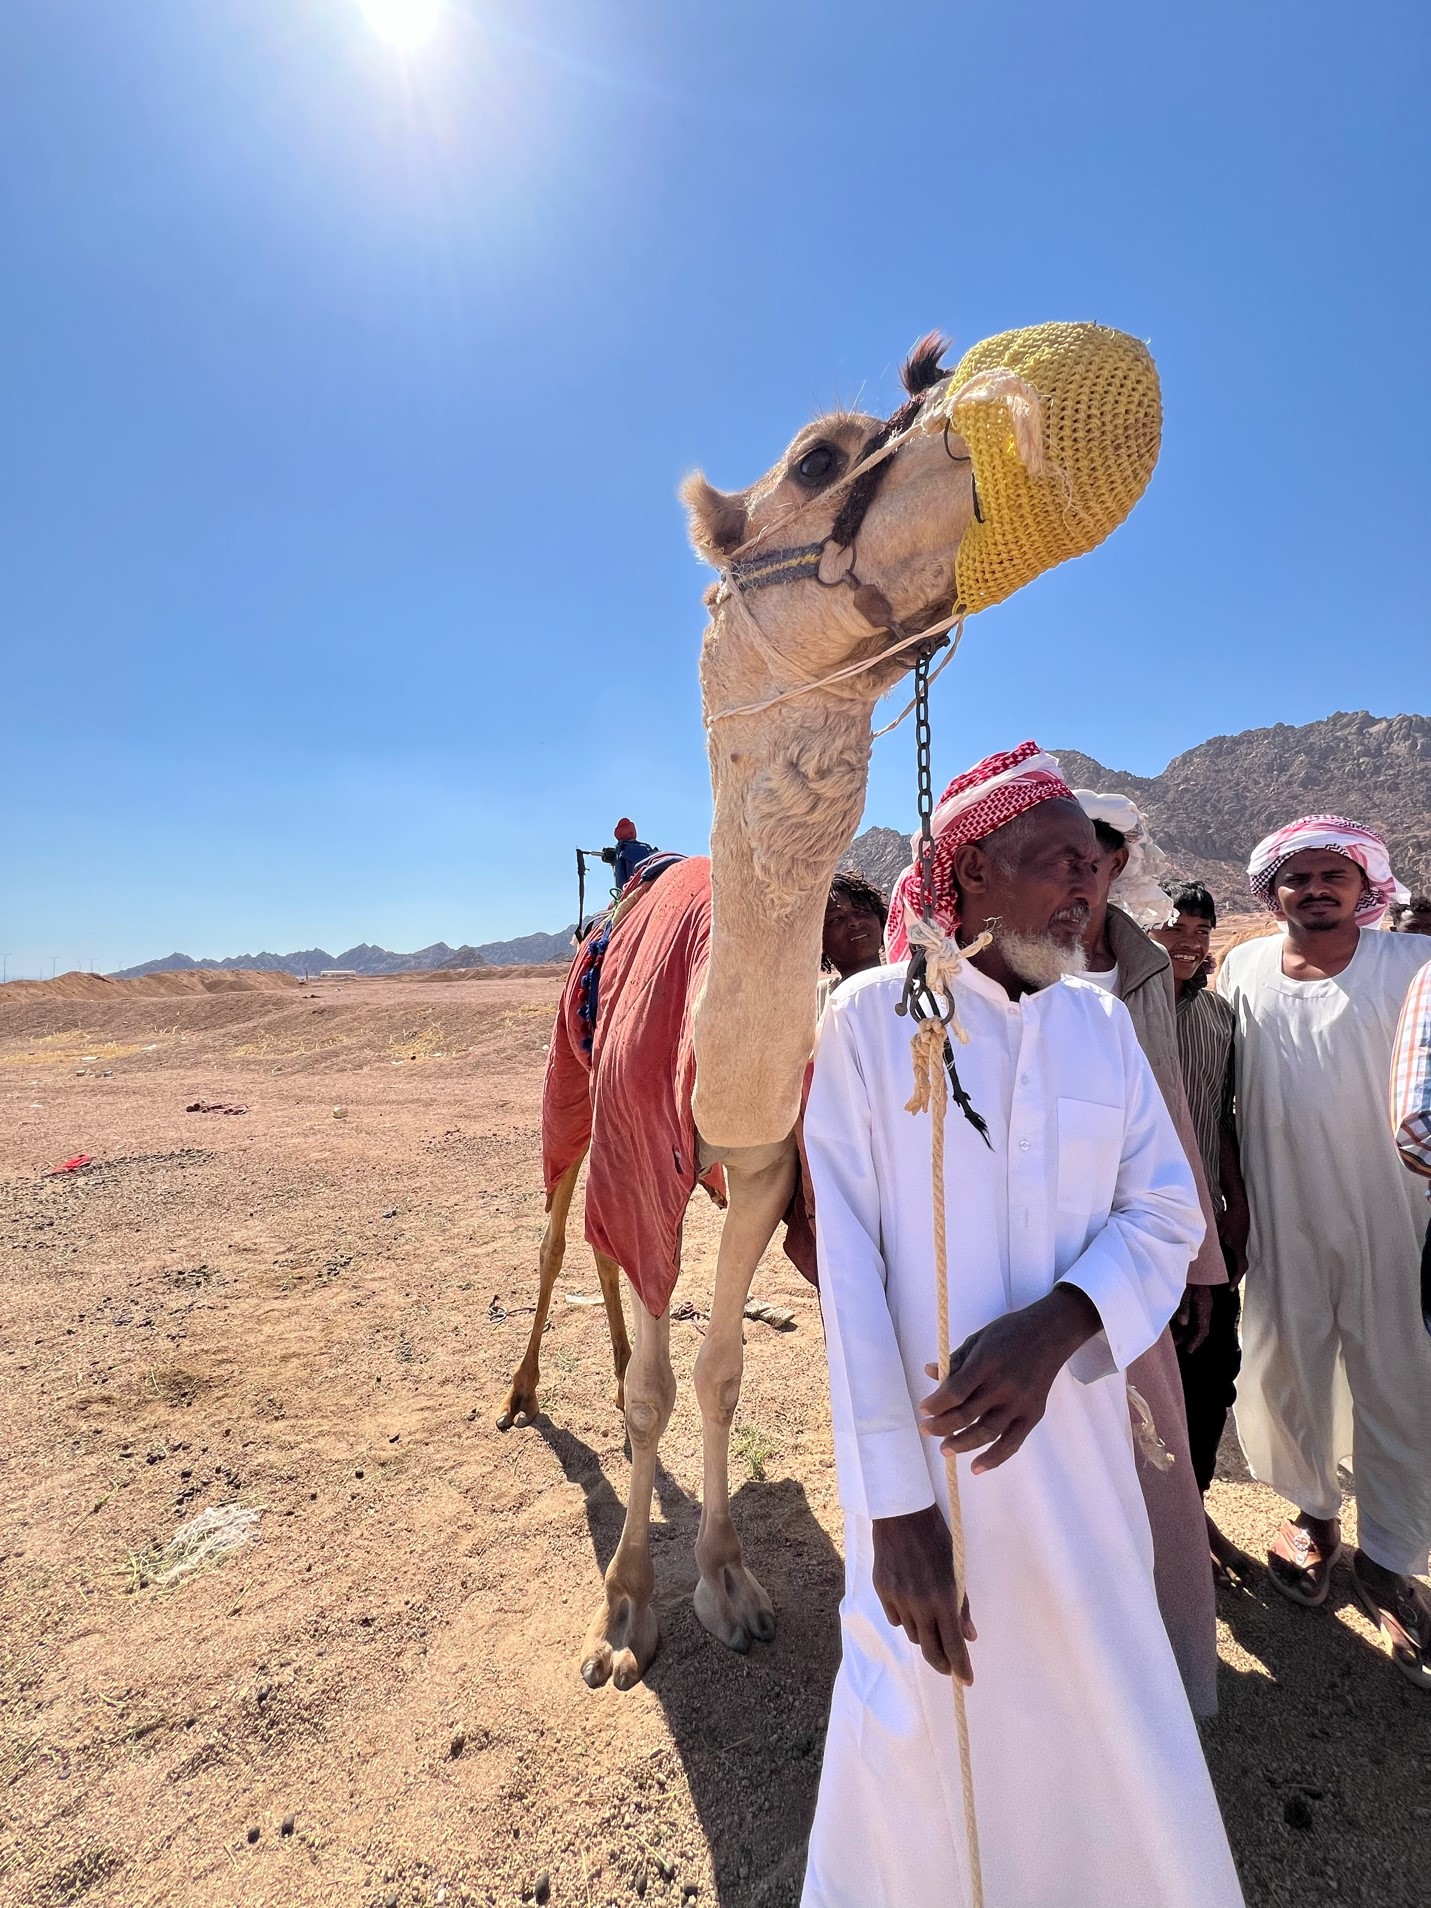 A bedouin with his camel